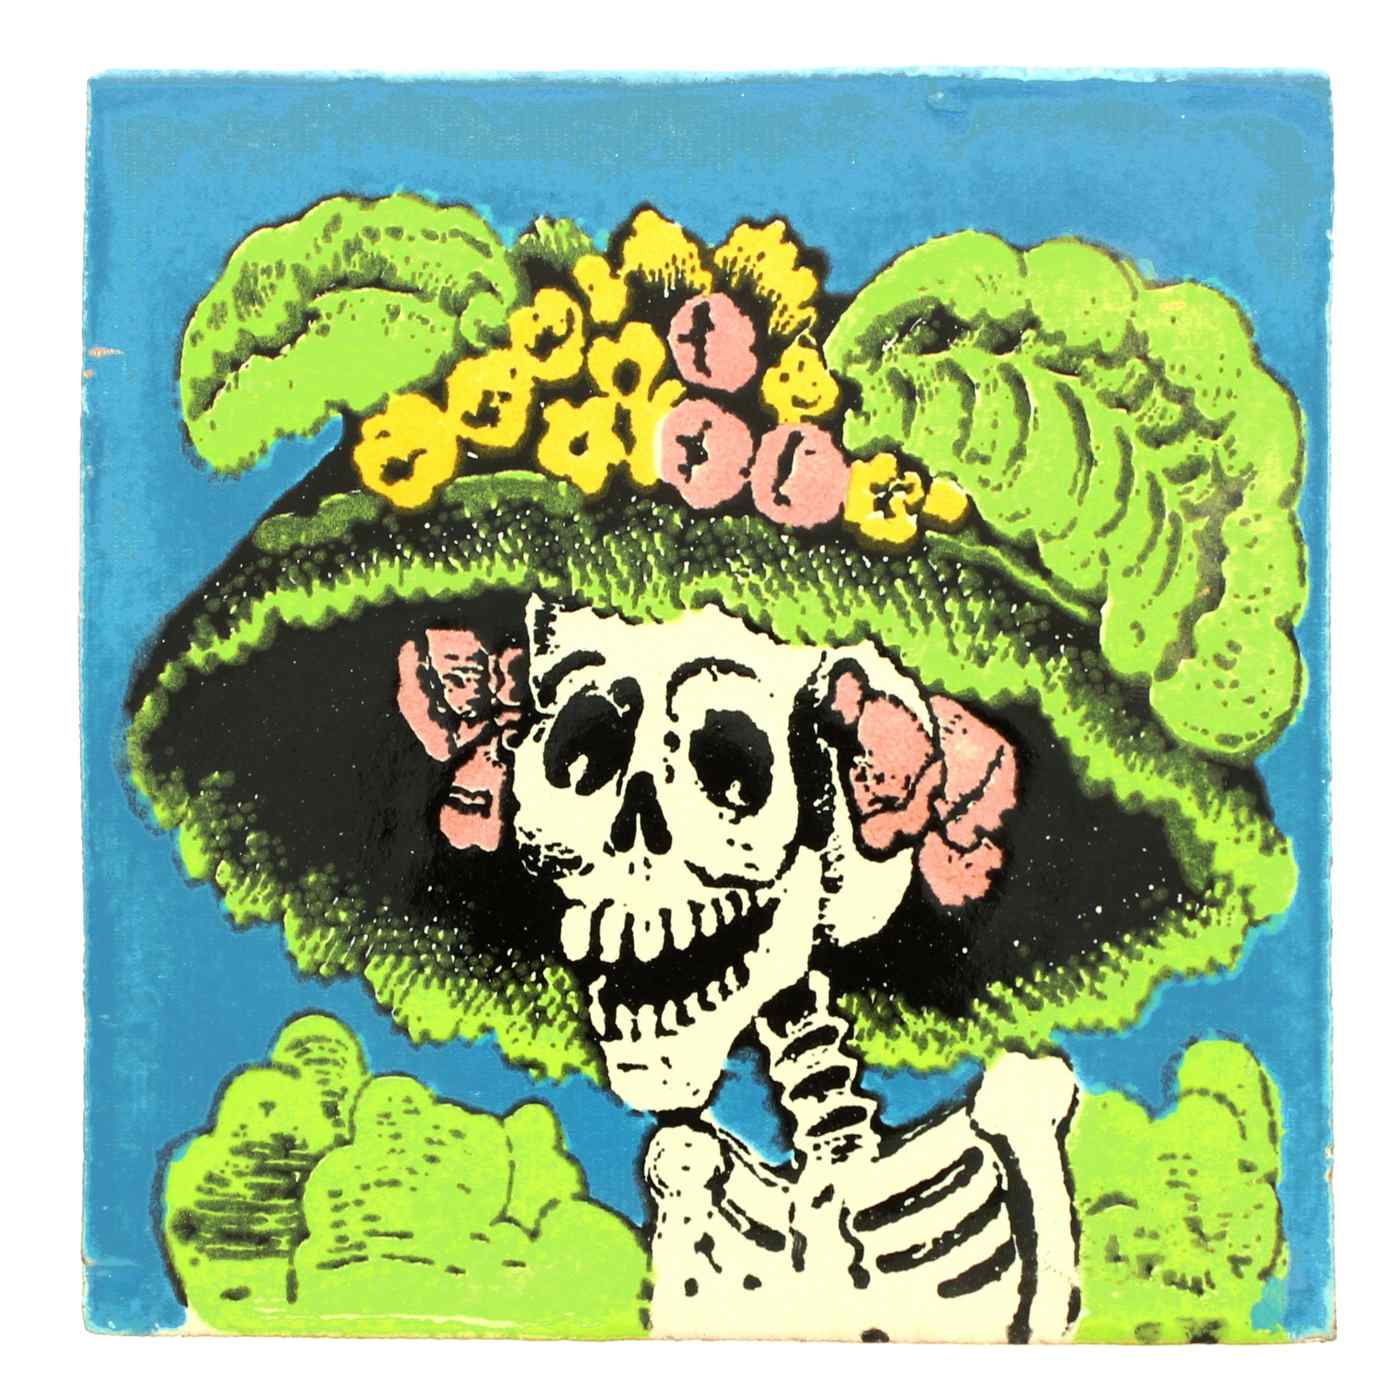 Blue Orange Pottery Day of the Dead 4" x 4" Decorative Tiles, Assorted Colors & Designs; image 1 of 5